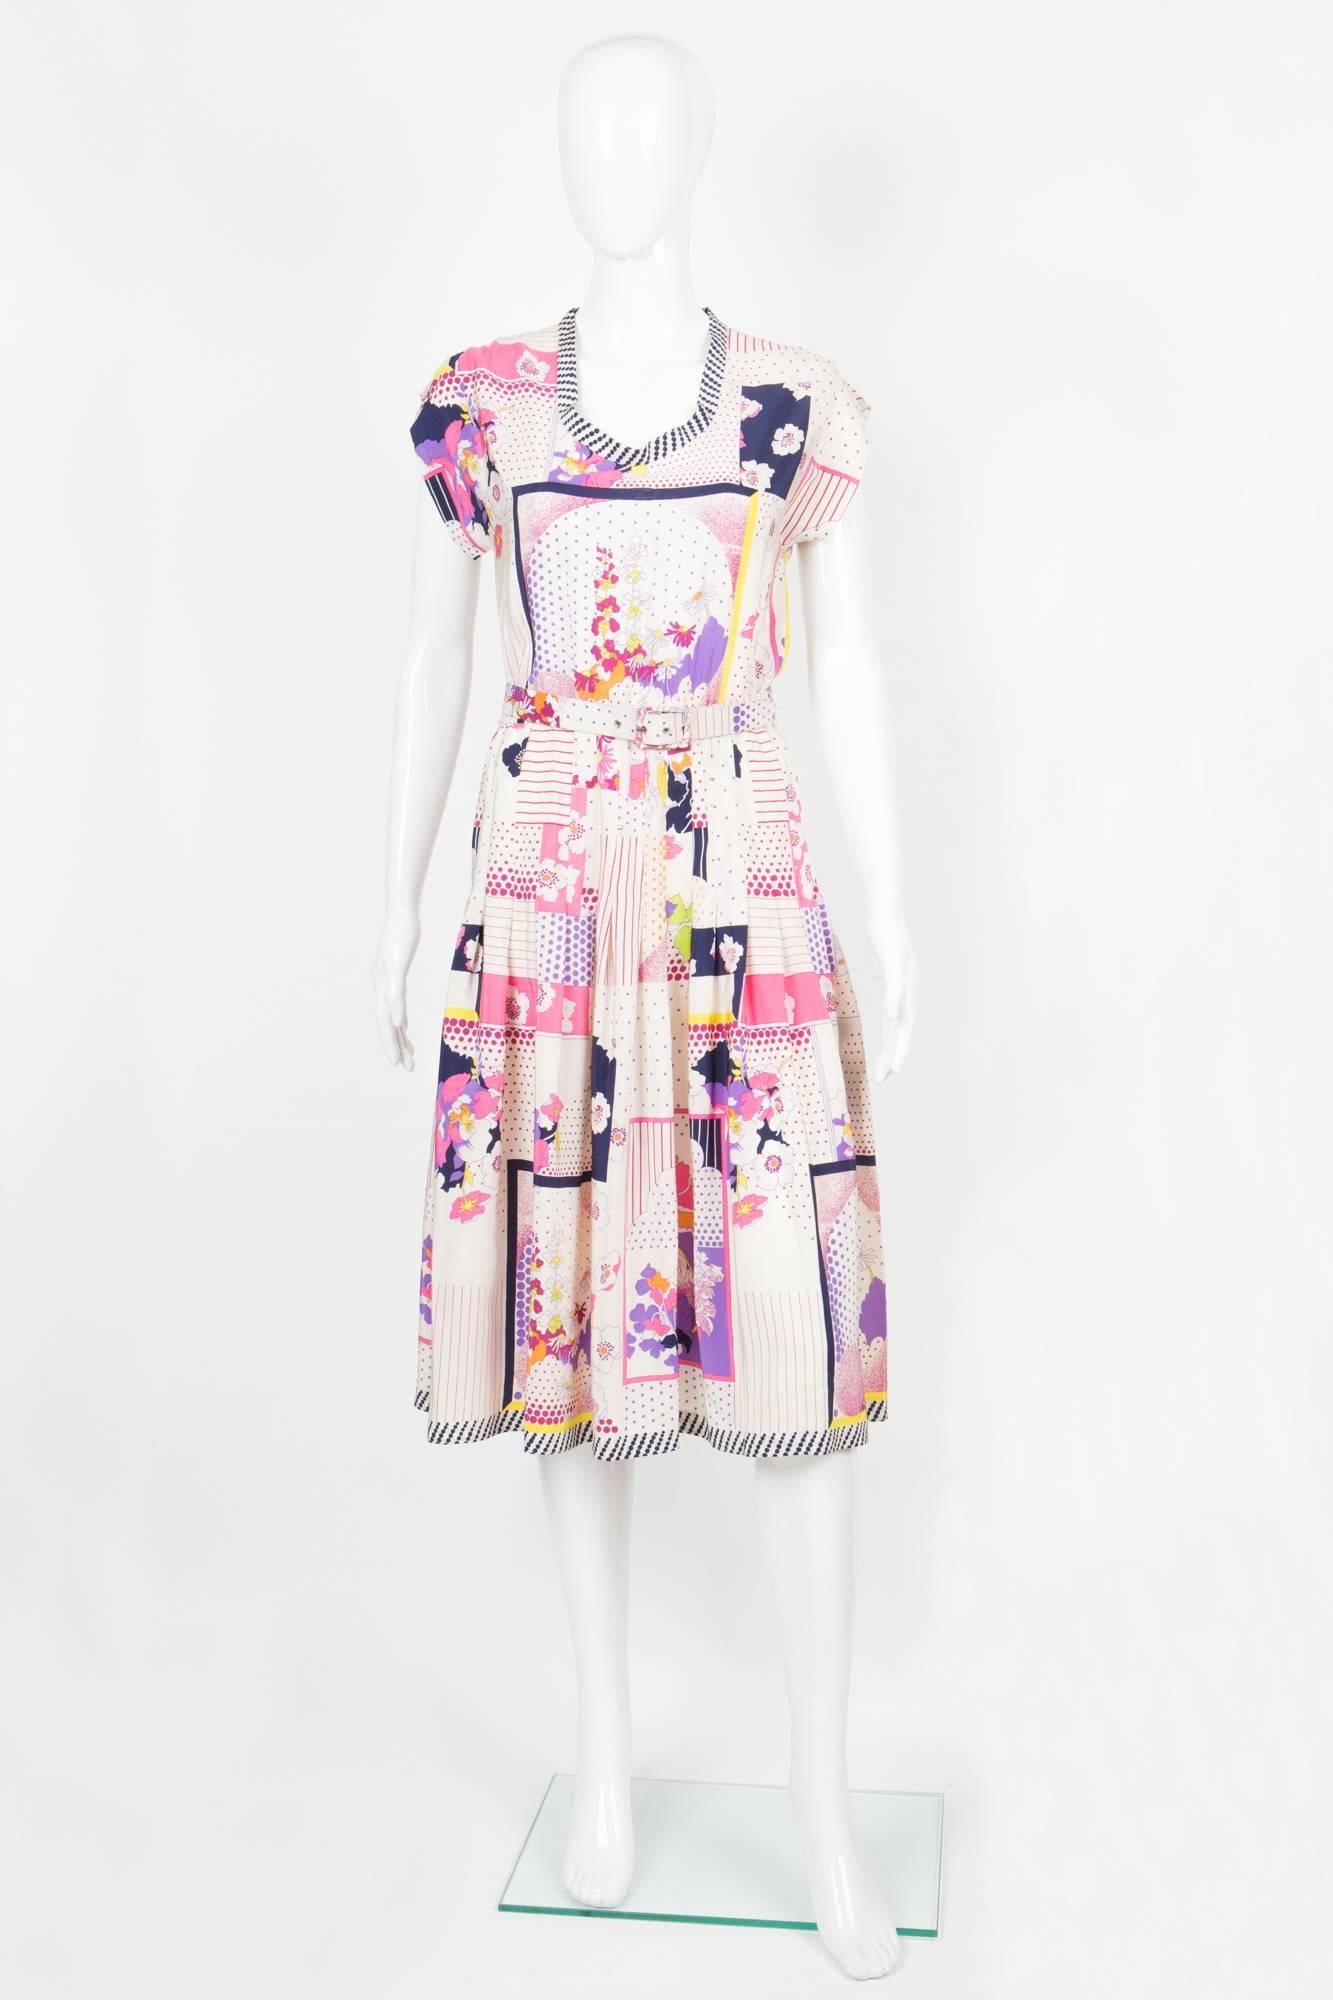 Gorgeous 70s Lanvin silk printed cocktail dress featuring a flower & graphic print, a center back zip, a separated printed belt, an elasticated waist.
In excellent vintage condition. Made in France.
We guarantee you will receive this gorgeous